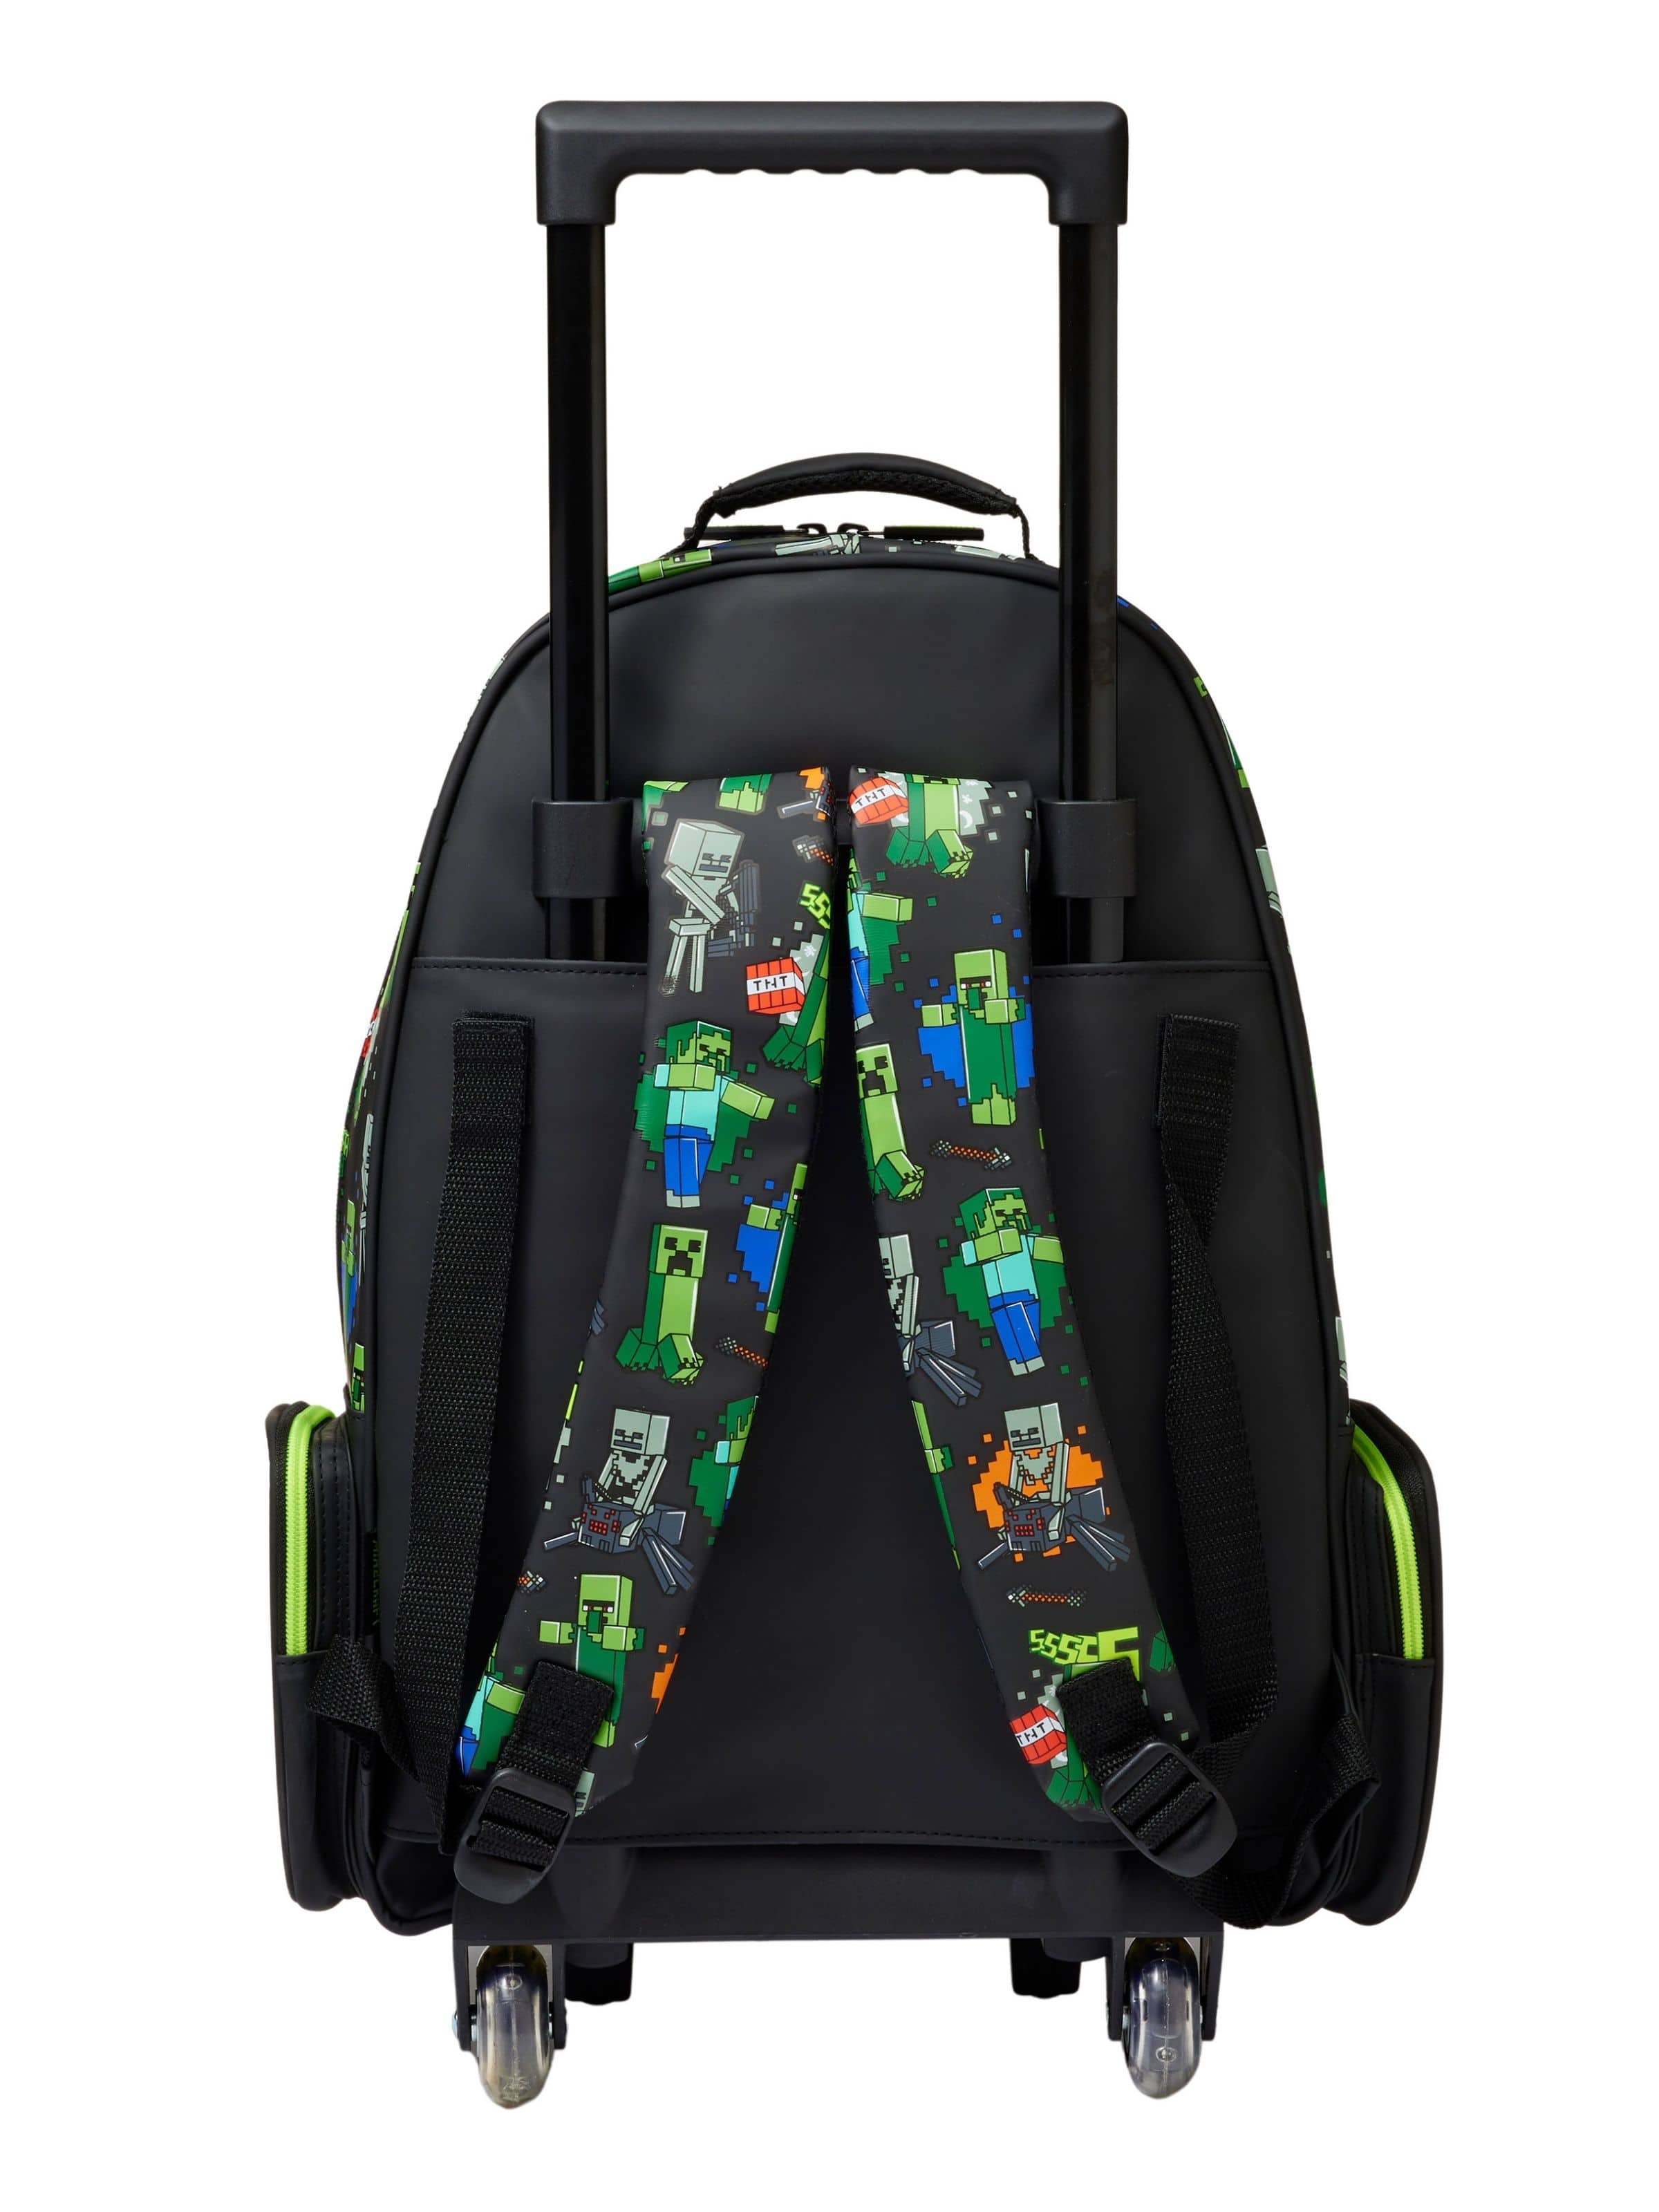 Minecraft Trolley Backpack With Light Up Wheels - Smiggle Online